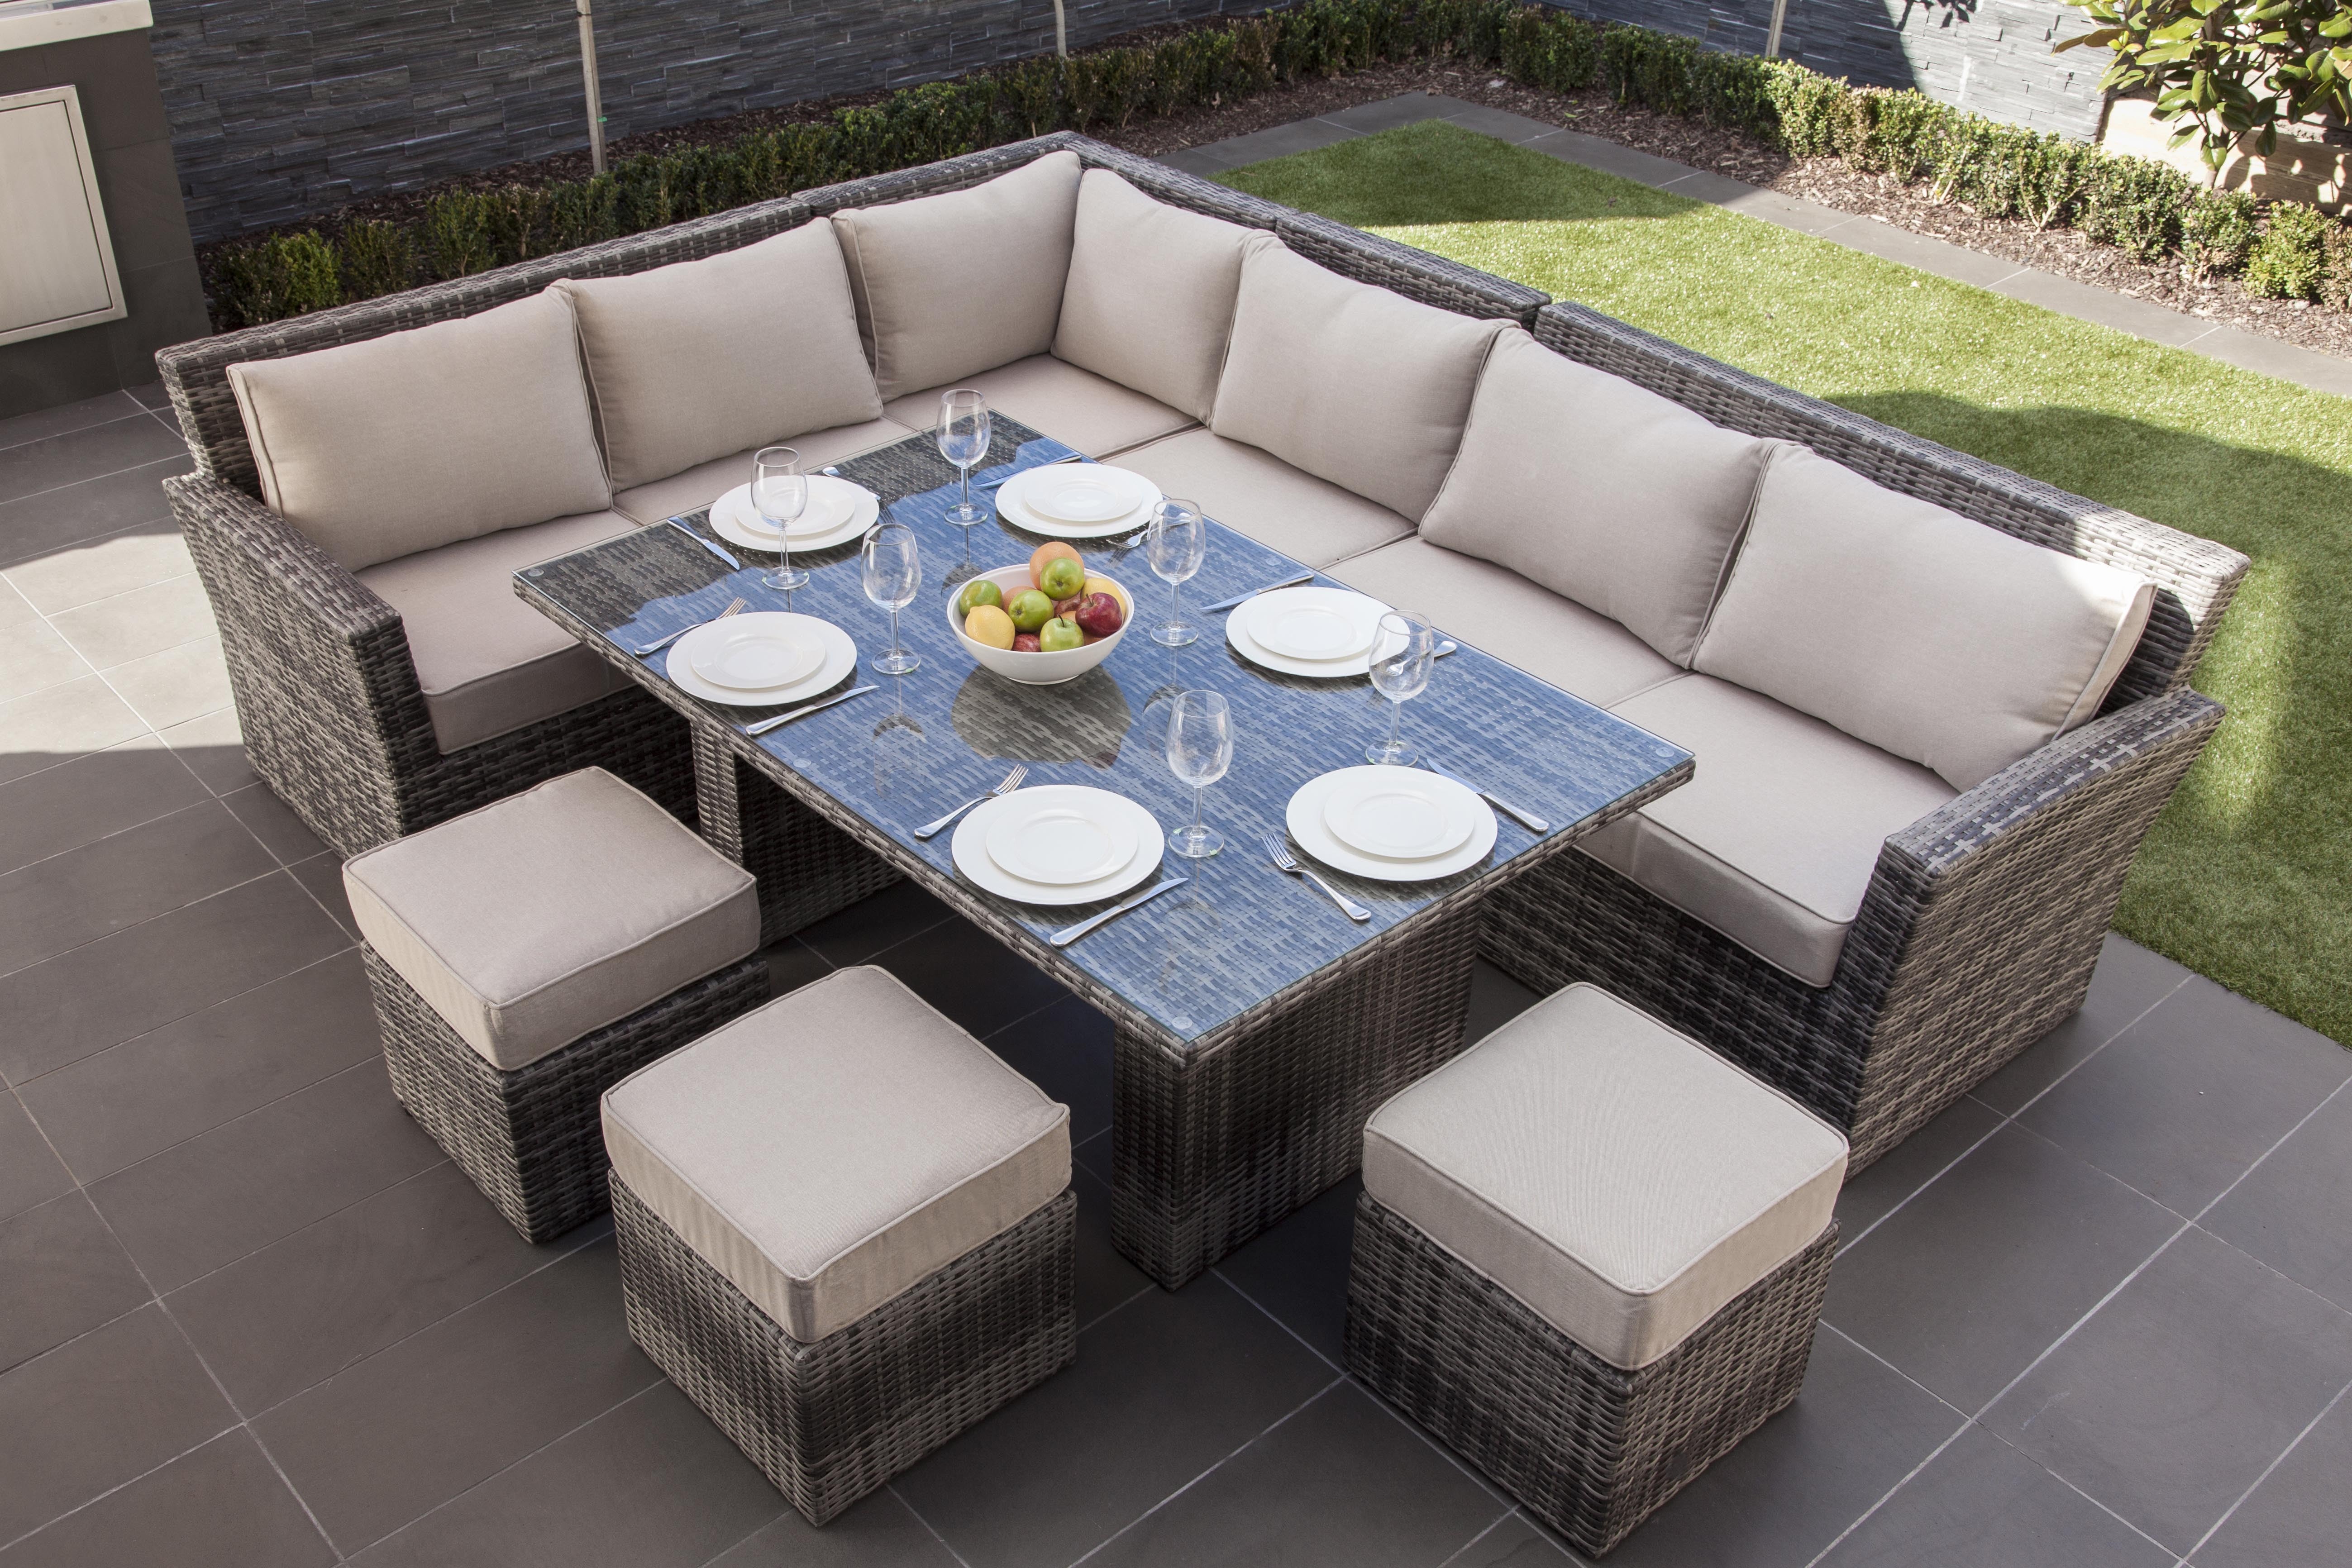 Abrihome Deluxe 8 Piece Deep Seating Group with Cushion